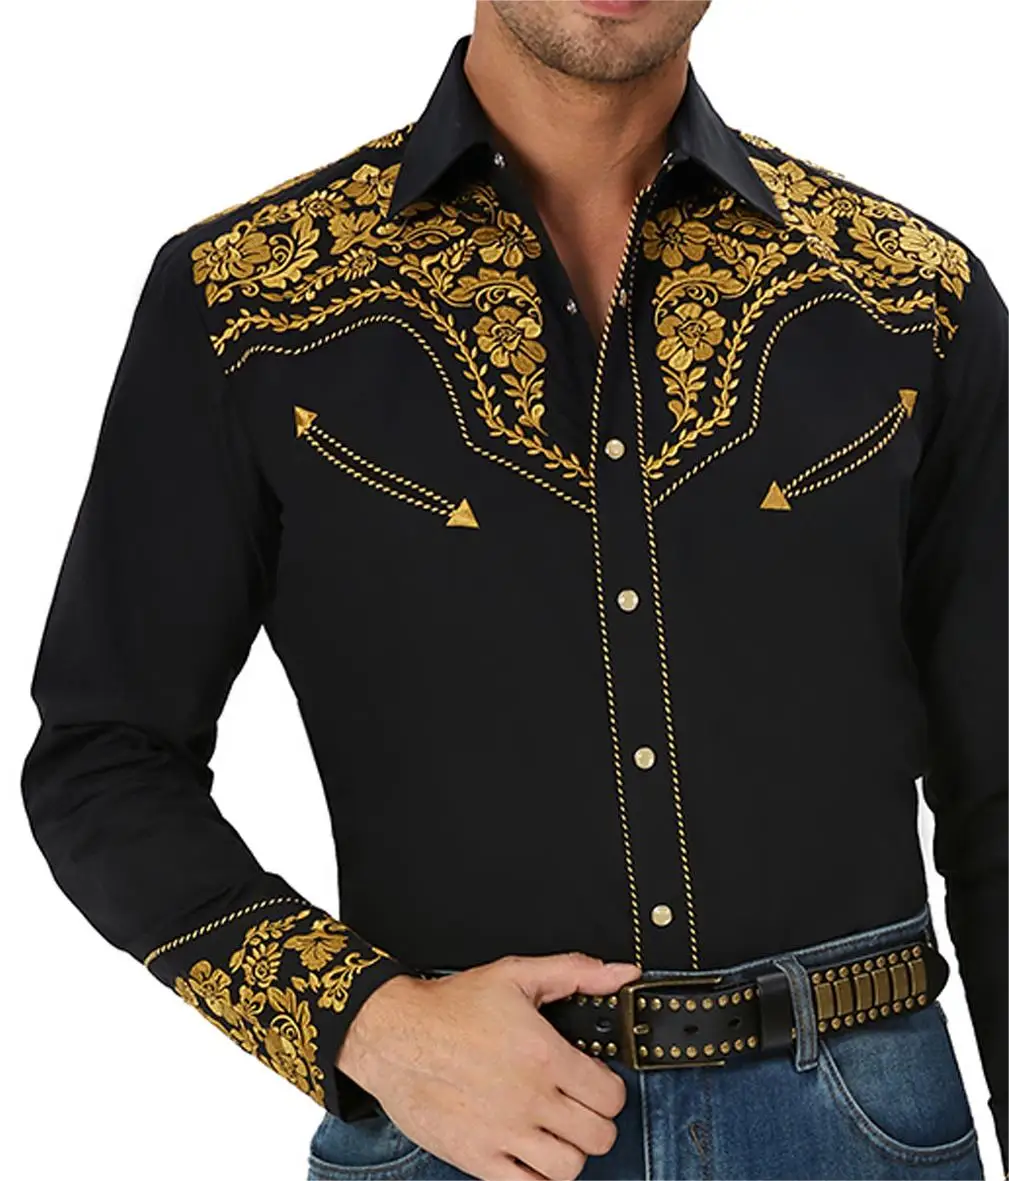 Men's Western Cowboy Shirt Long Sleeve Slim Fit Embroidered Fashion ...